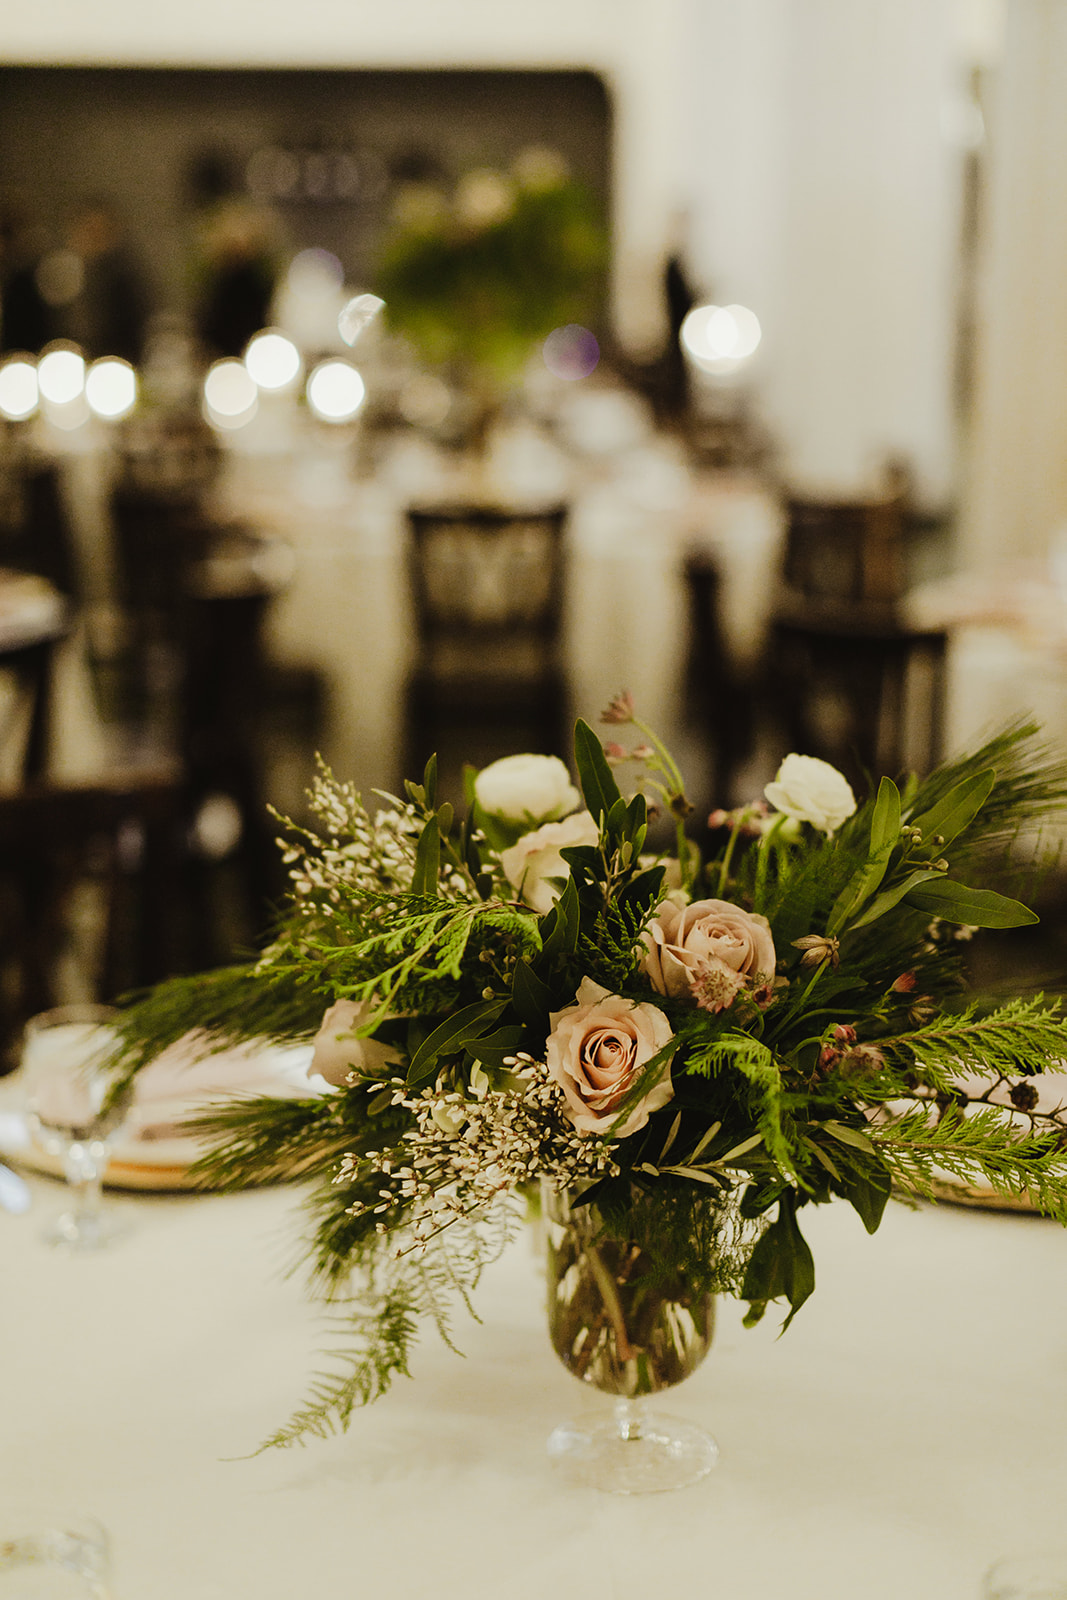 A blush and green floral arrangement on a table at a wedding